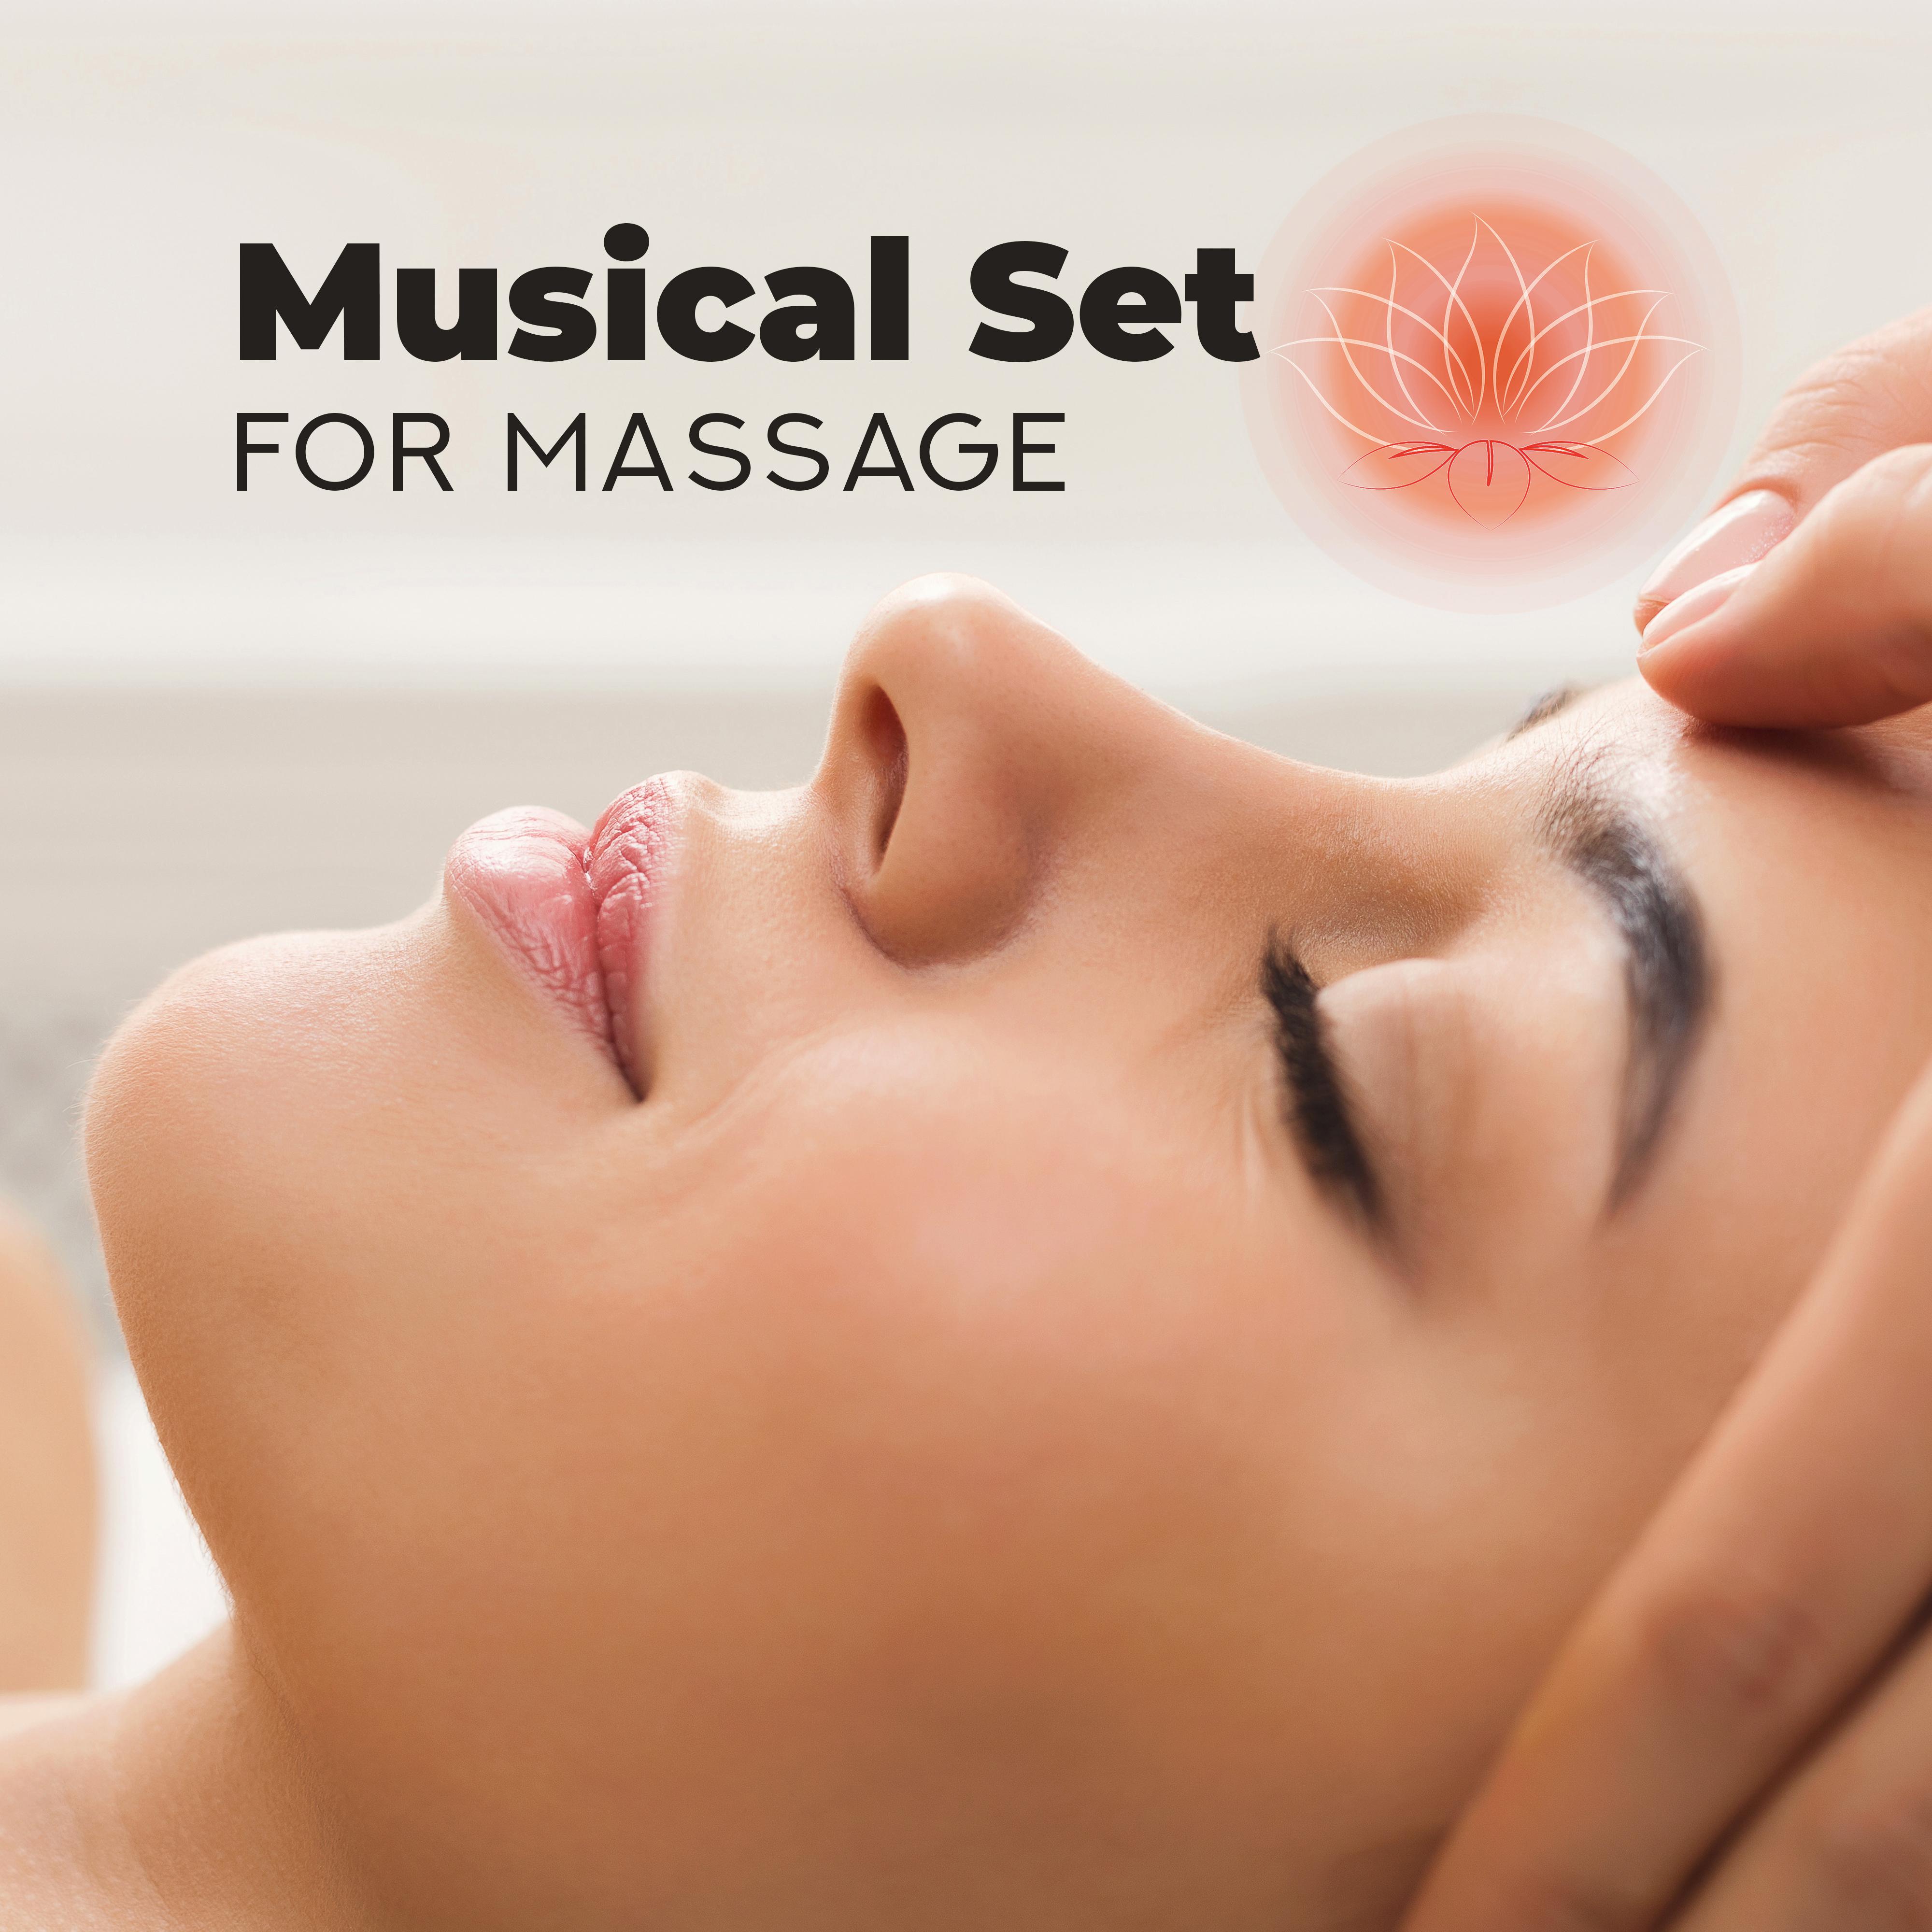 Musical Set for Massage: Gentle and Subtle Melodies for Massage and Relaxation